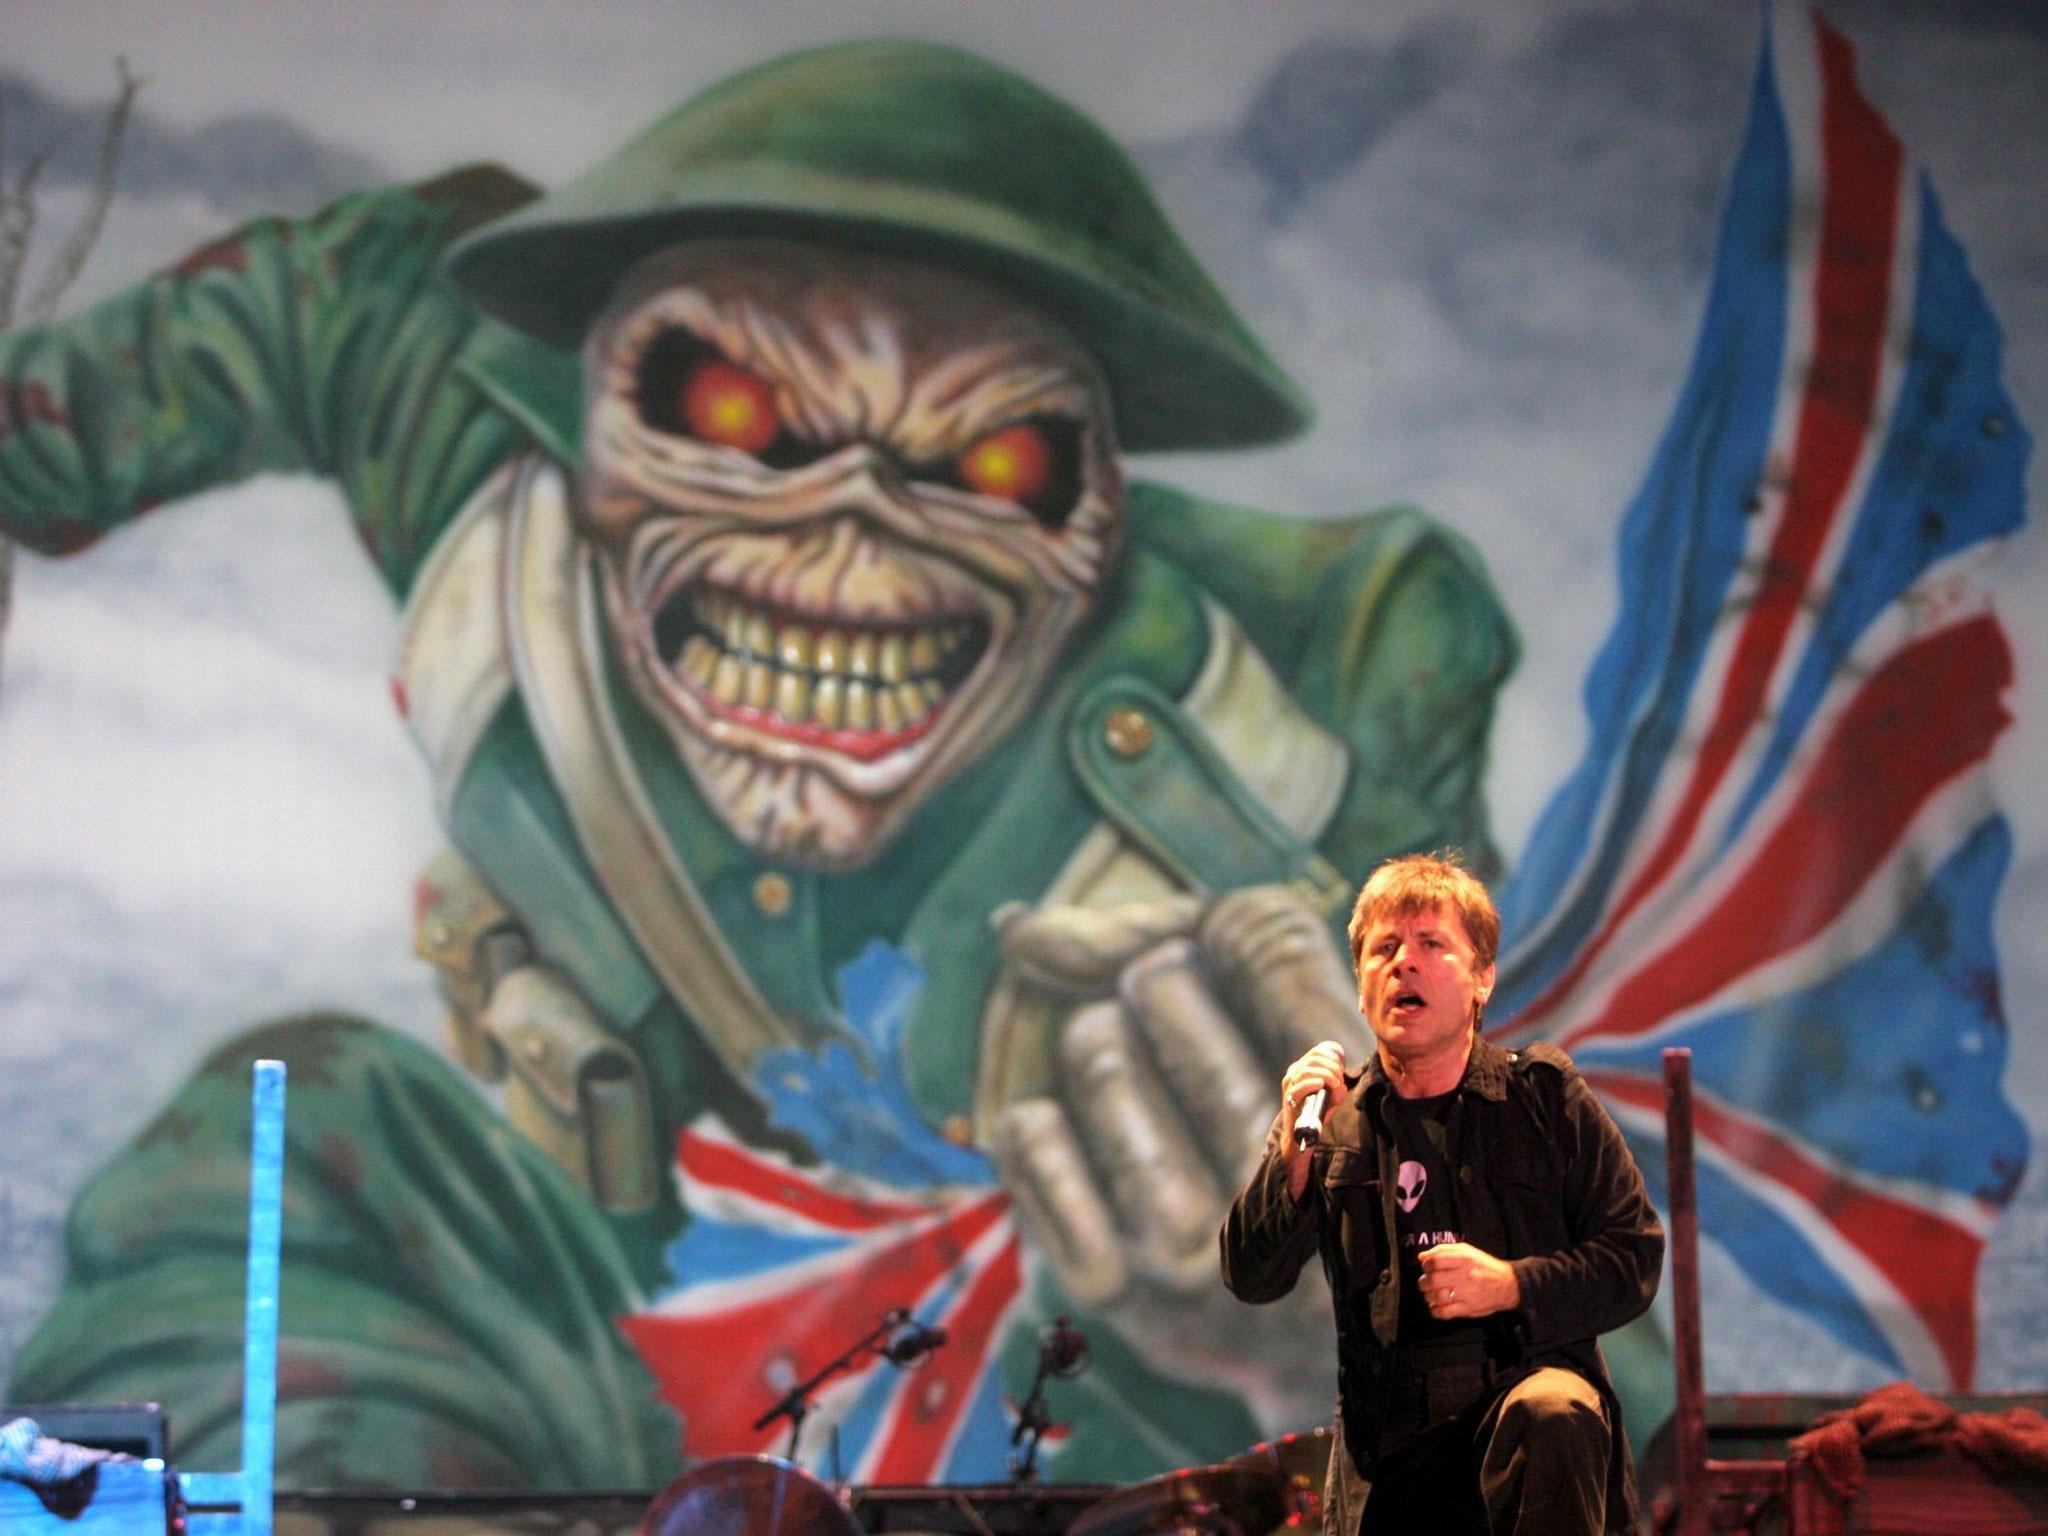 Iron Maiden’s mascot Eddie has been an integral part of their live show and album artwork throughout their long and illustrious history